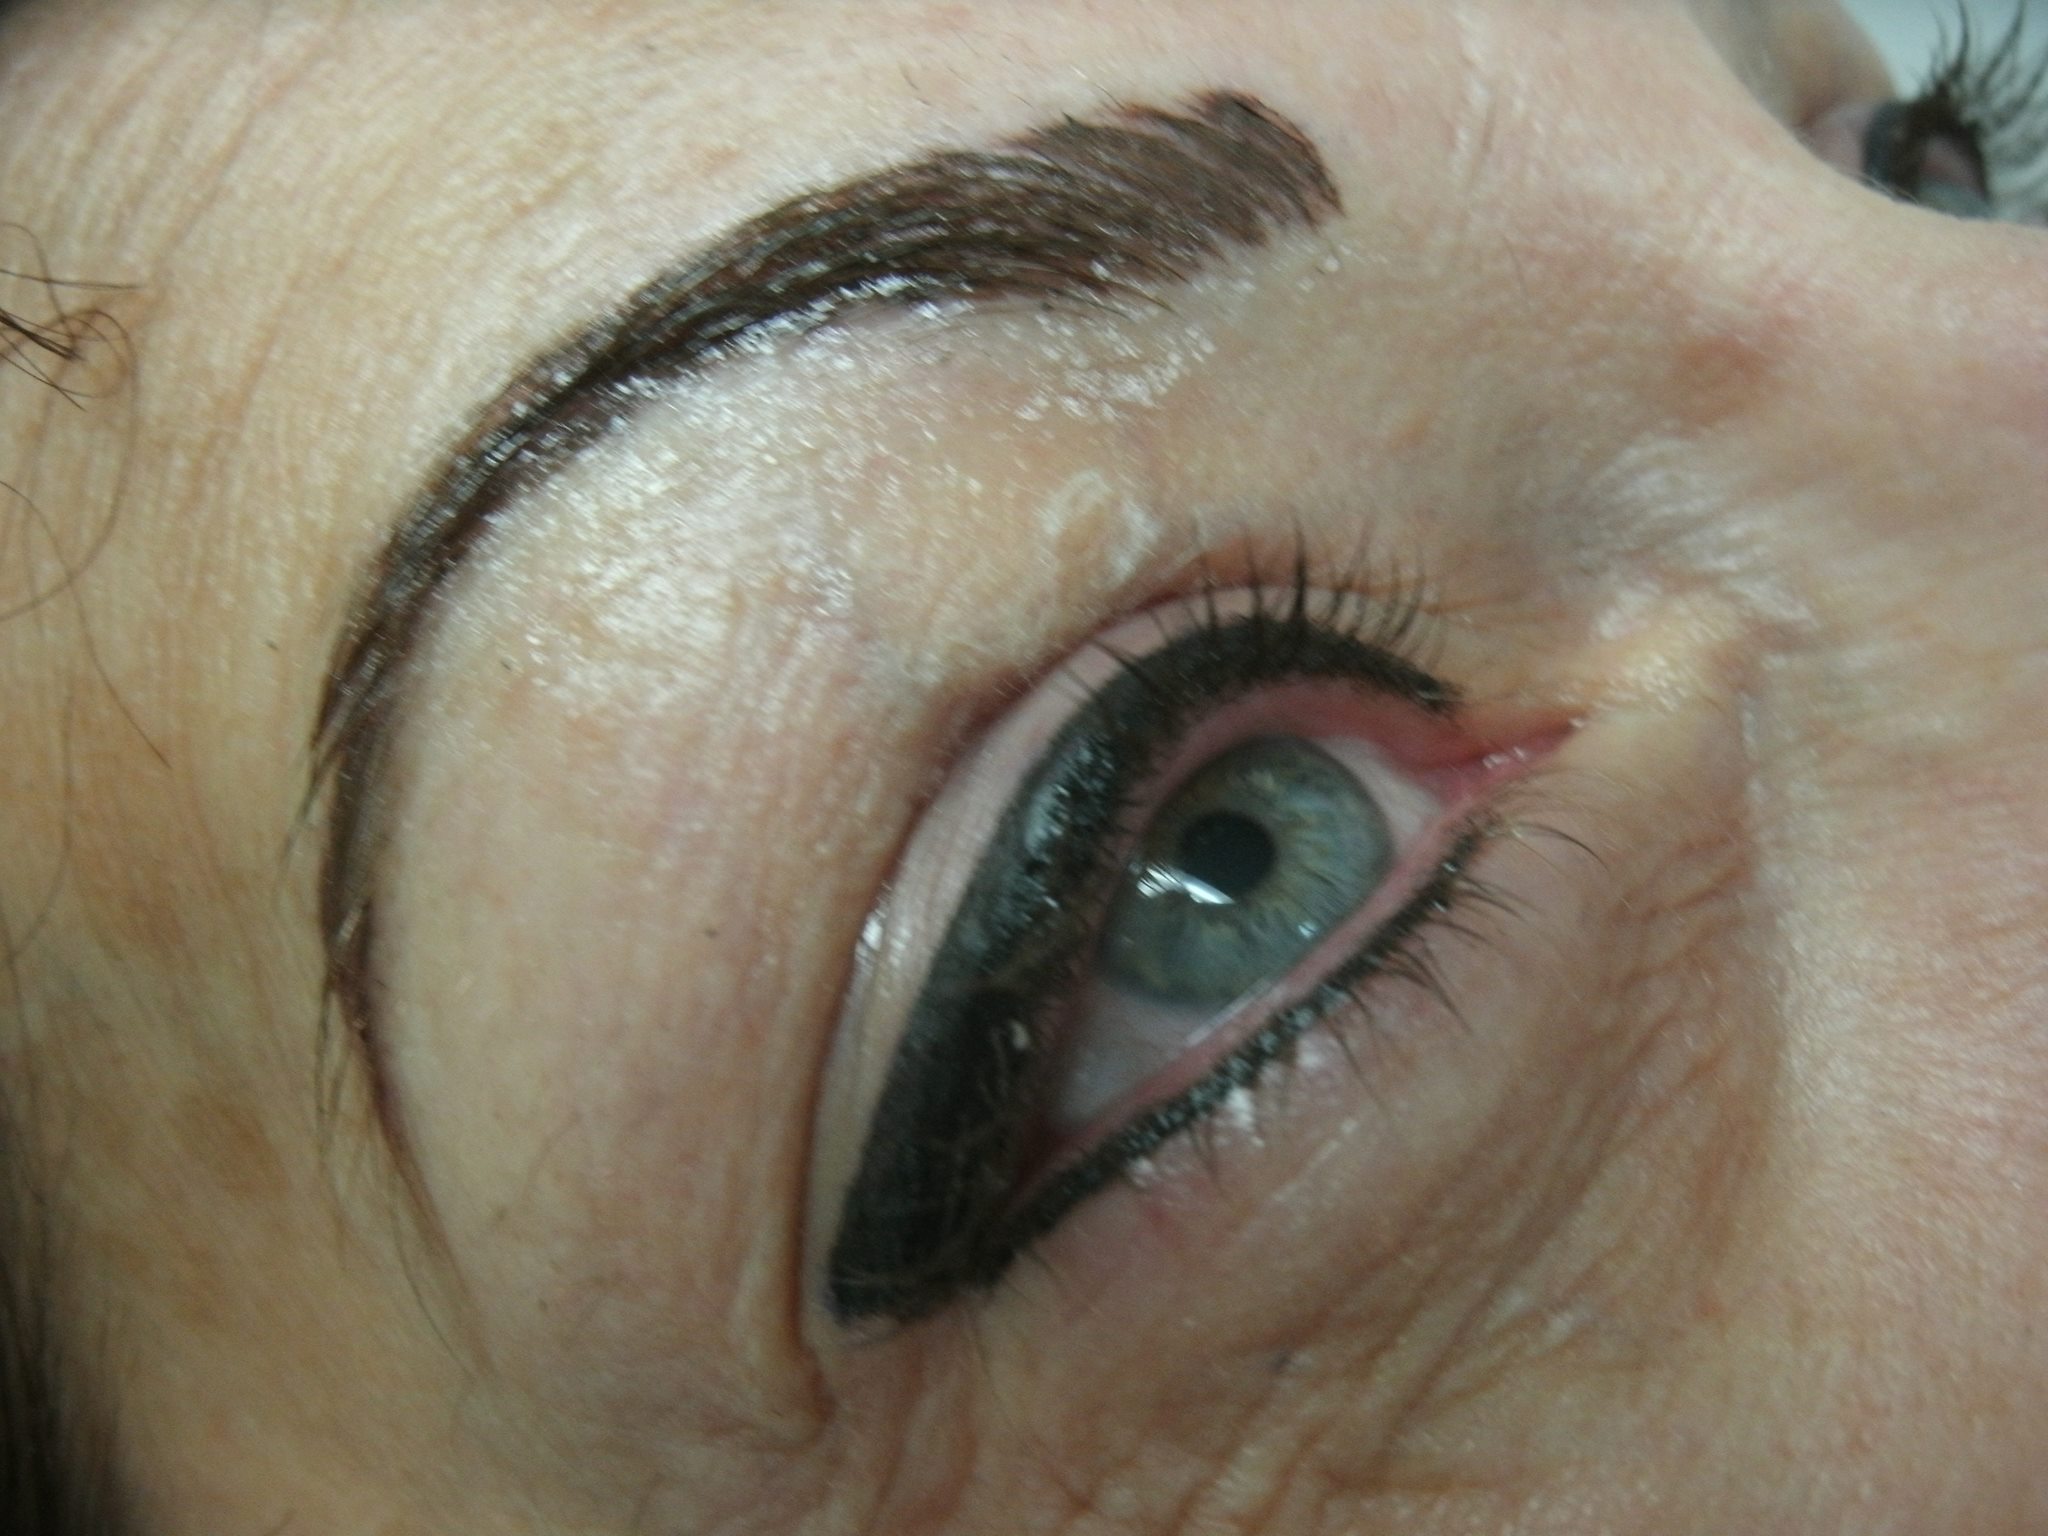 Top Service! Professional Permanent Eyeliner near Eau Claire, WI